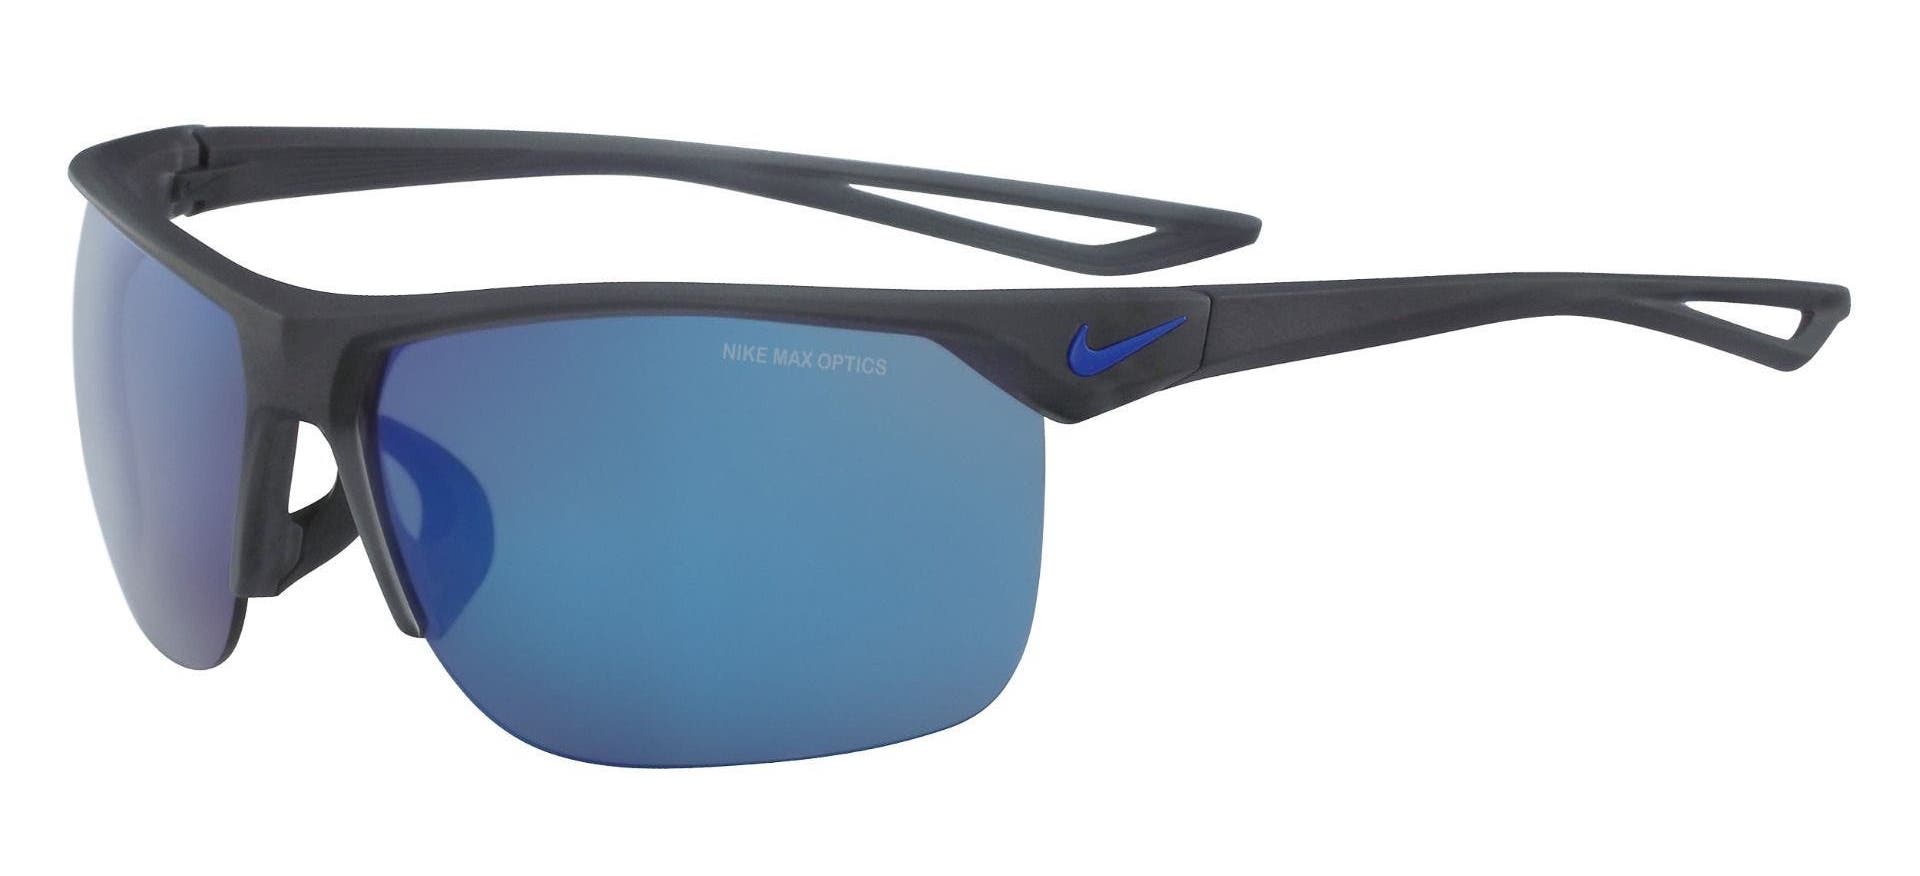 Best Nike Sunglasses with Interchangeable Lenses | SportRx